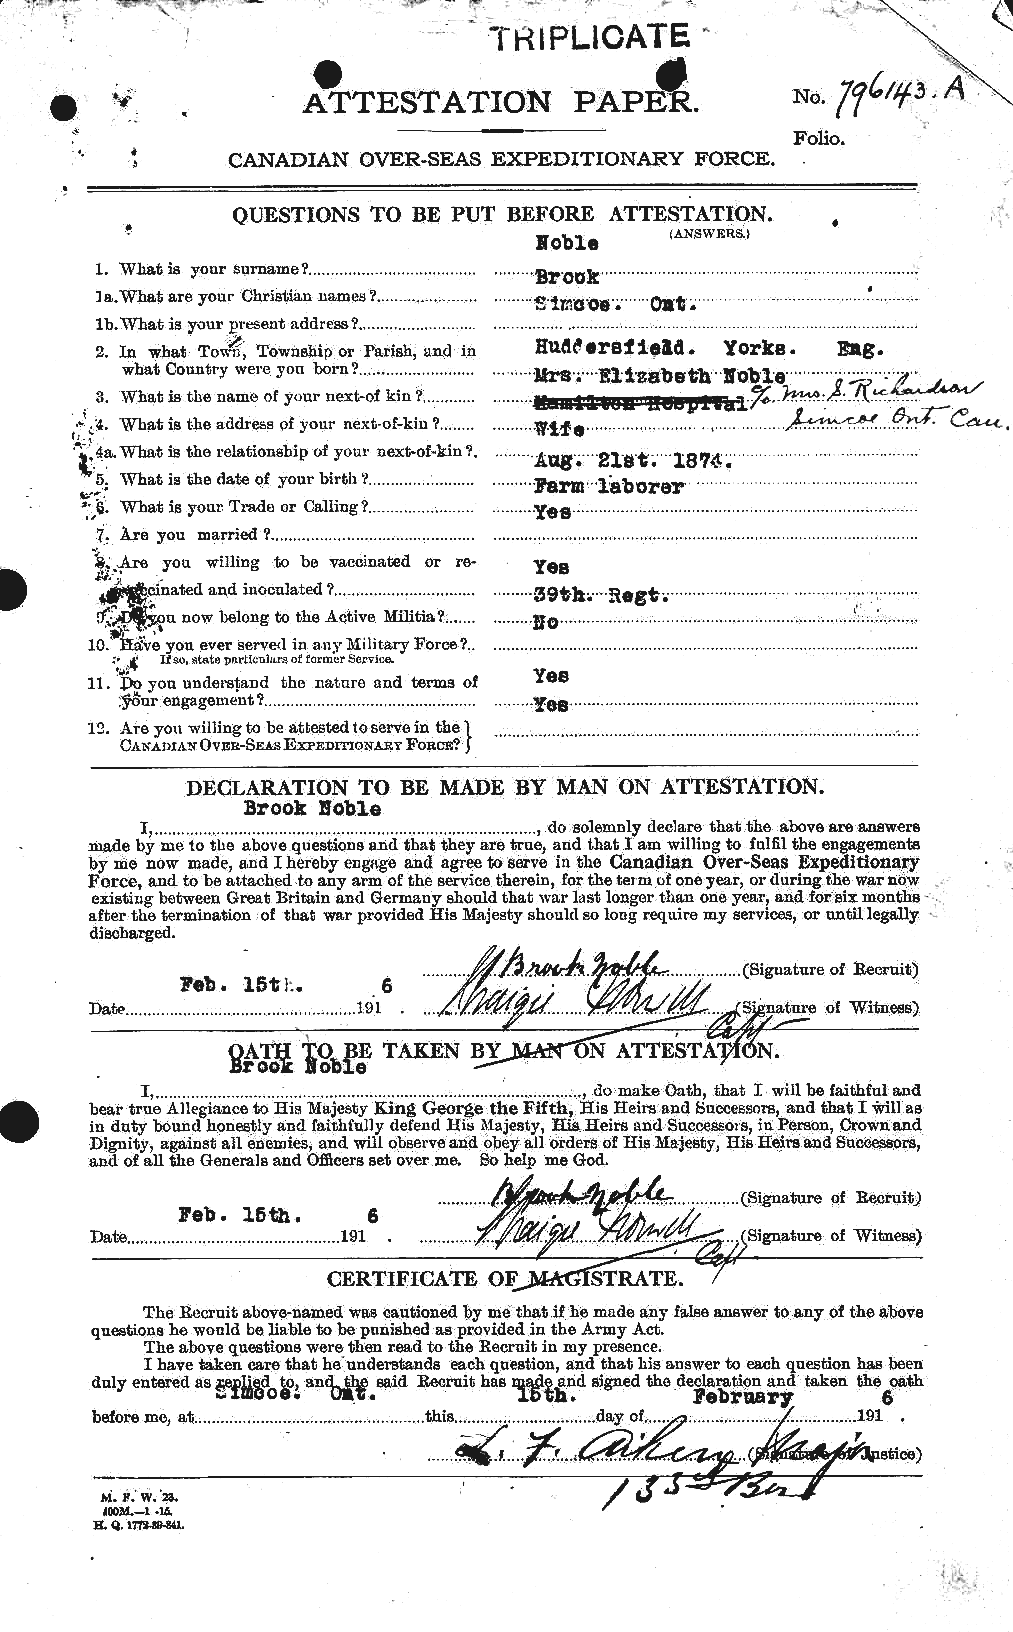 Personnel Records of the First World War - CEF 549375a